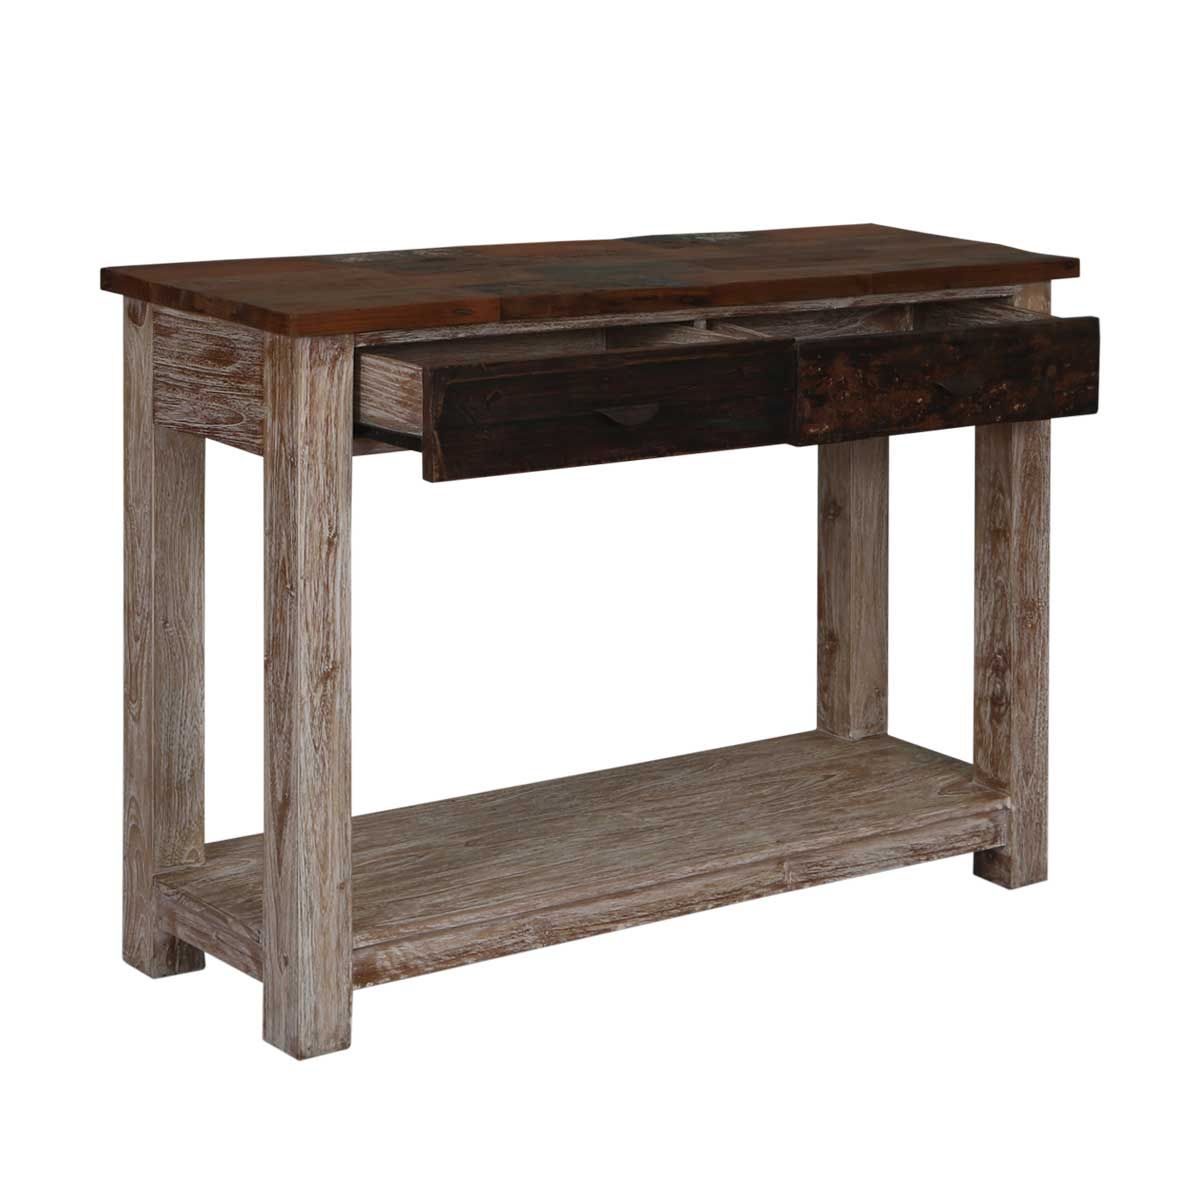 Santino Rugged Reclaimed Wood 2 Drawer Entryway Console Table Intended For Barnwood Console Tables (View 9 of 20)